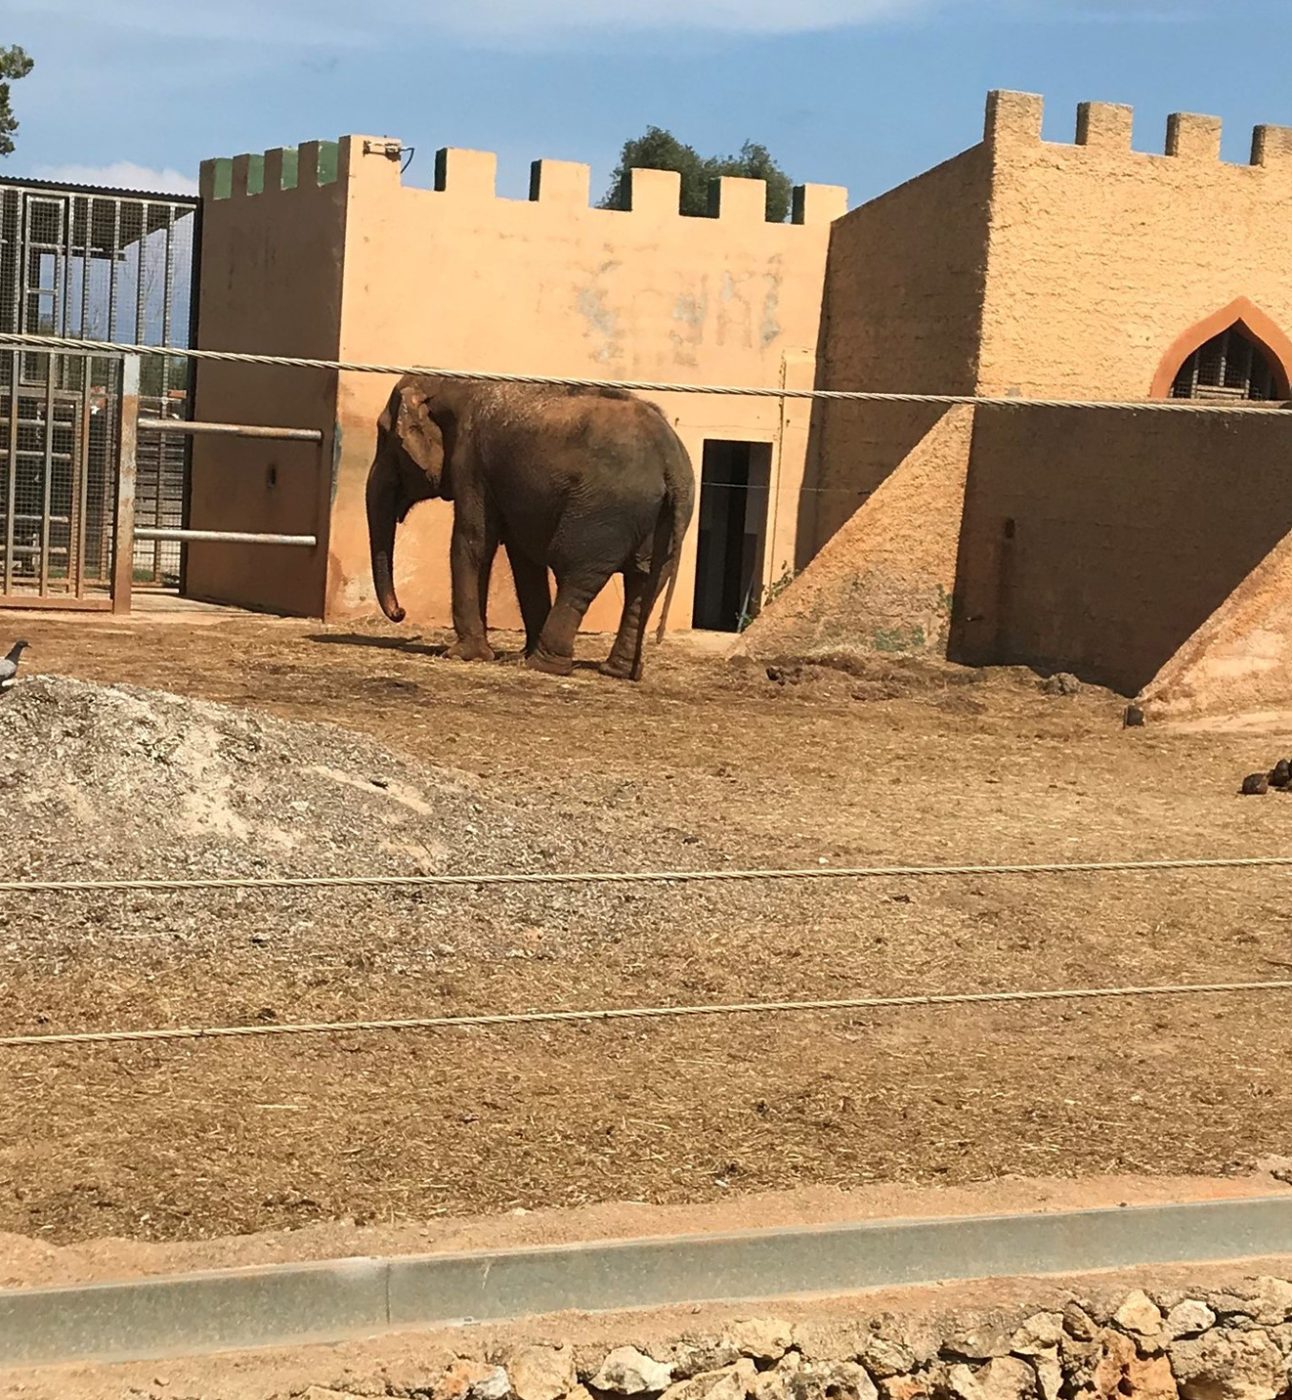 An elephant stands alone in a dusty zoo enclosure